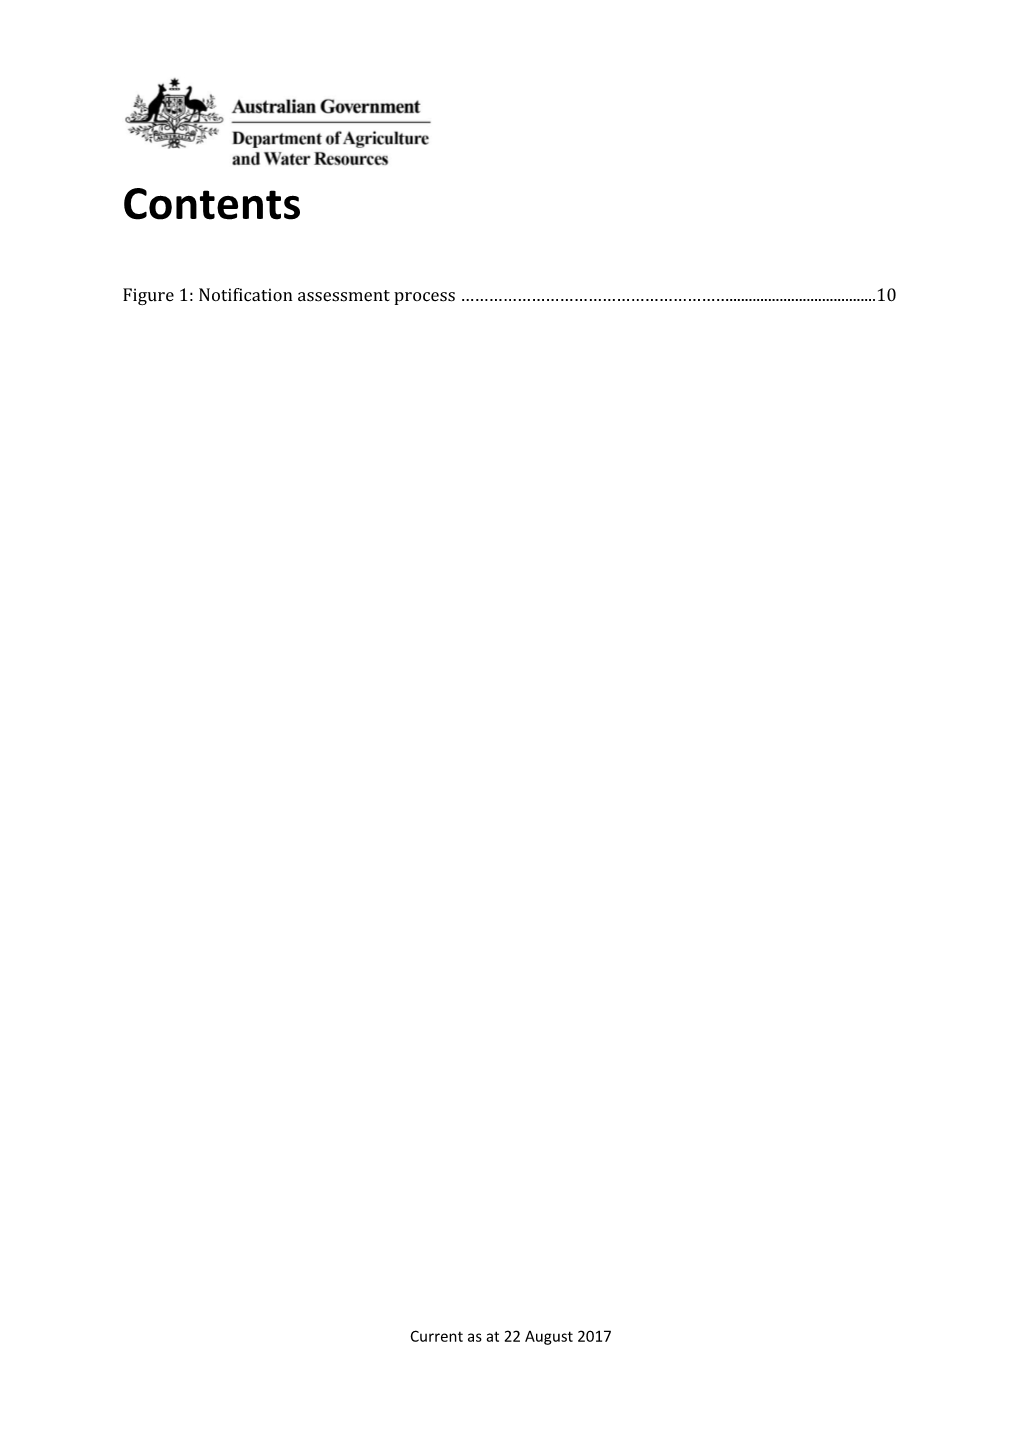 Standard Report Template with Numbered Headings